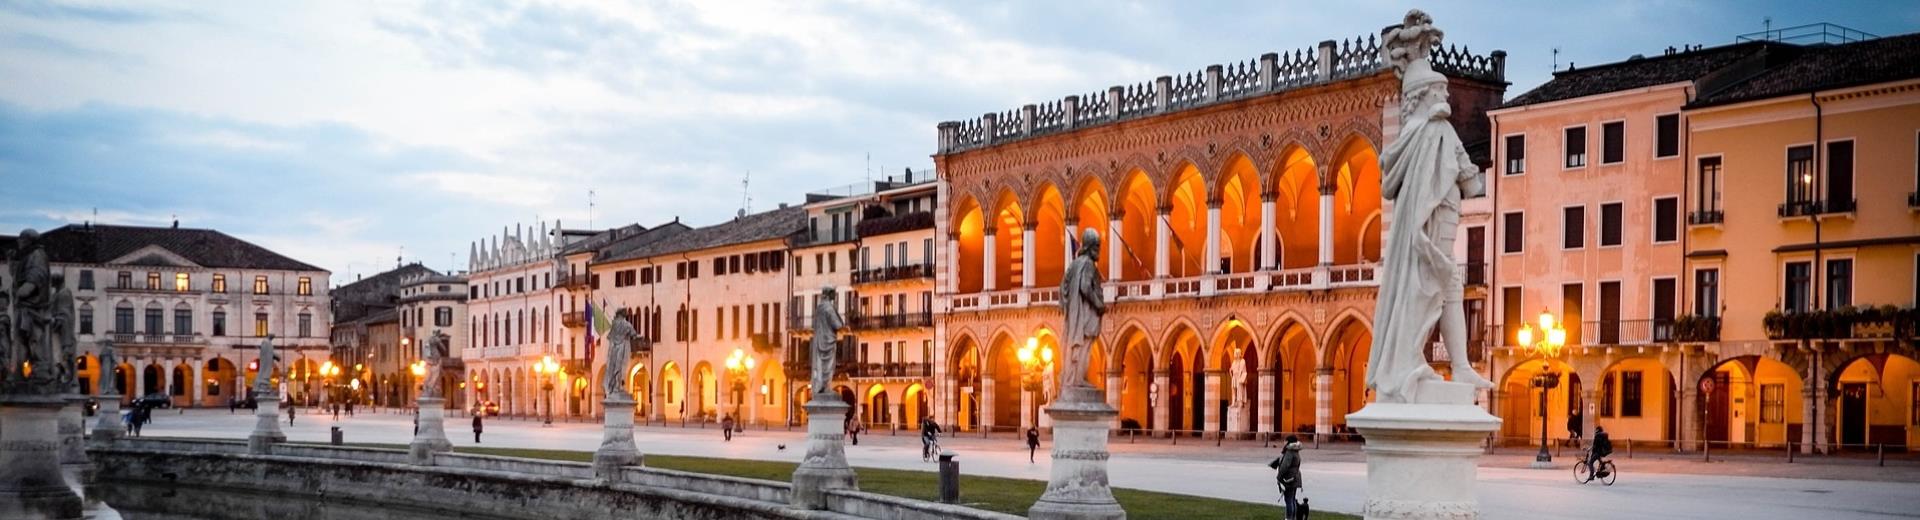 Visit Padova and stay at the 4 star Plus Hotel Galileo